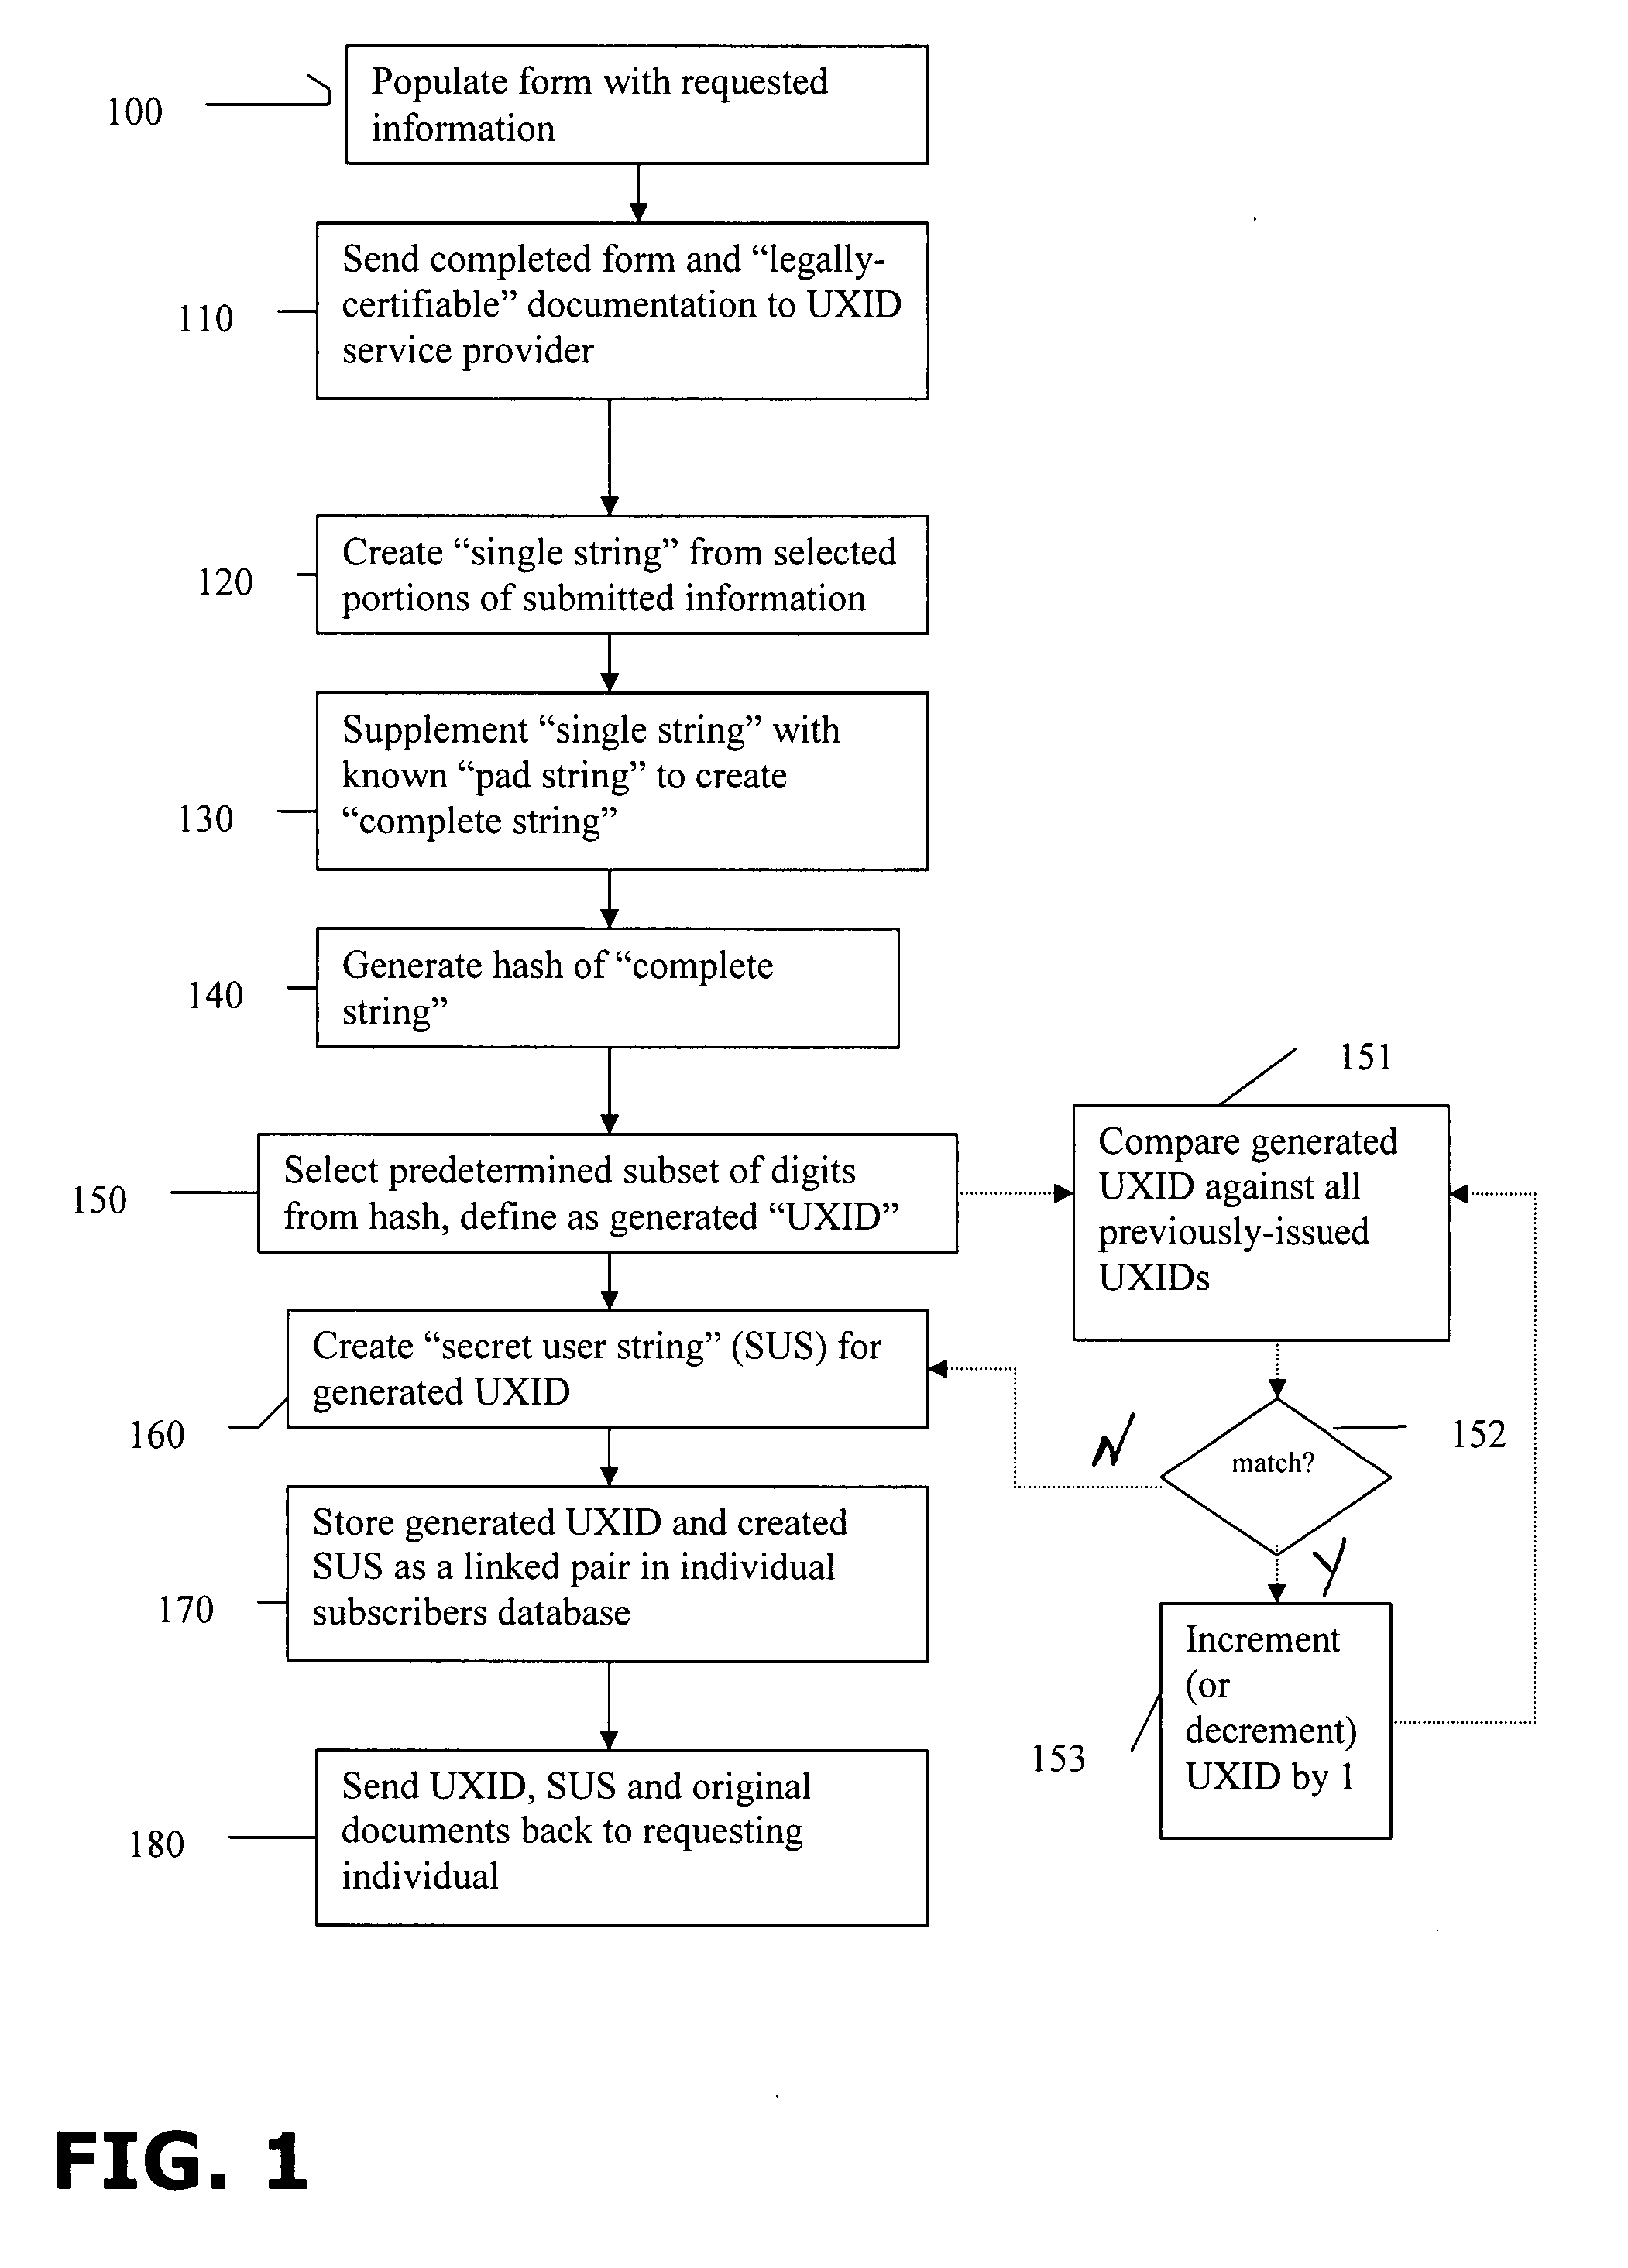 System and method of providing unique personal identifiers for use in the anonymous and secure exchange of data